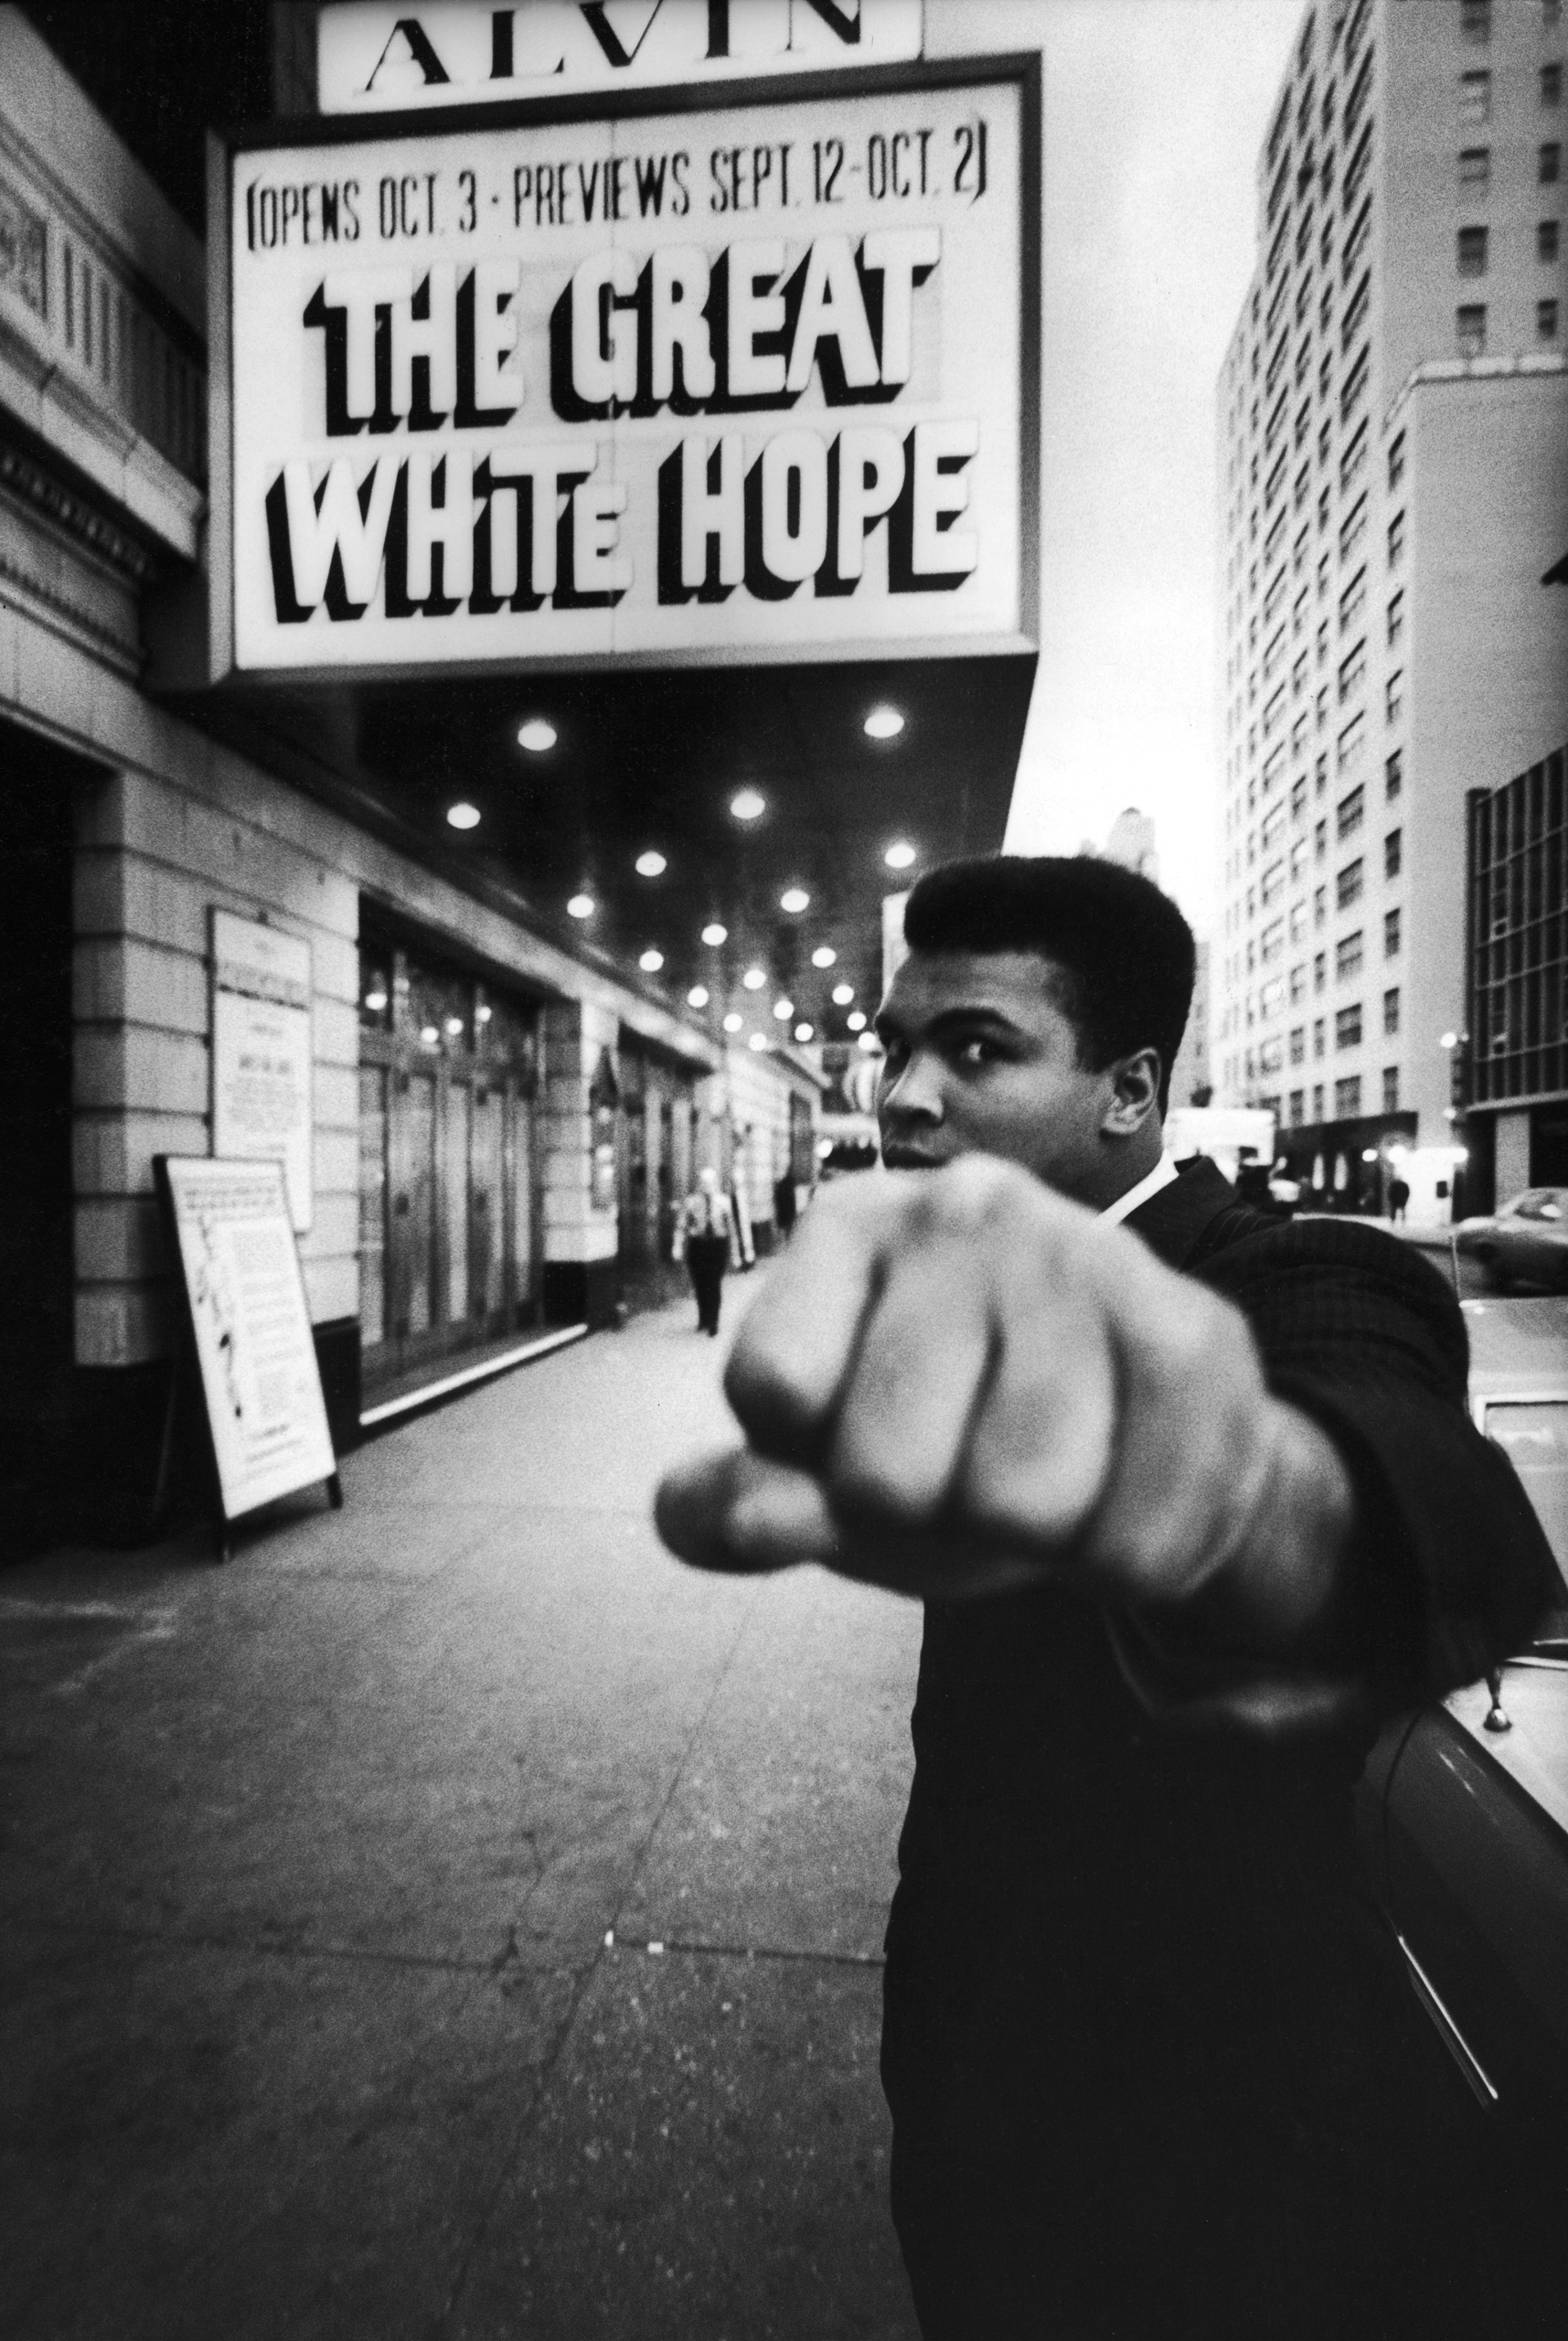 Muhammad Ali, posing outside the Alvin theater where "The Great White Hope" is playing, 1968.